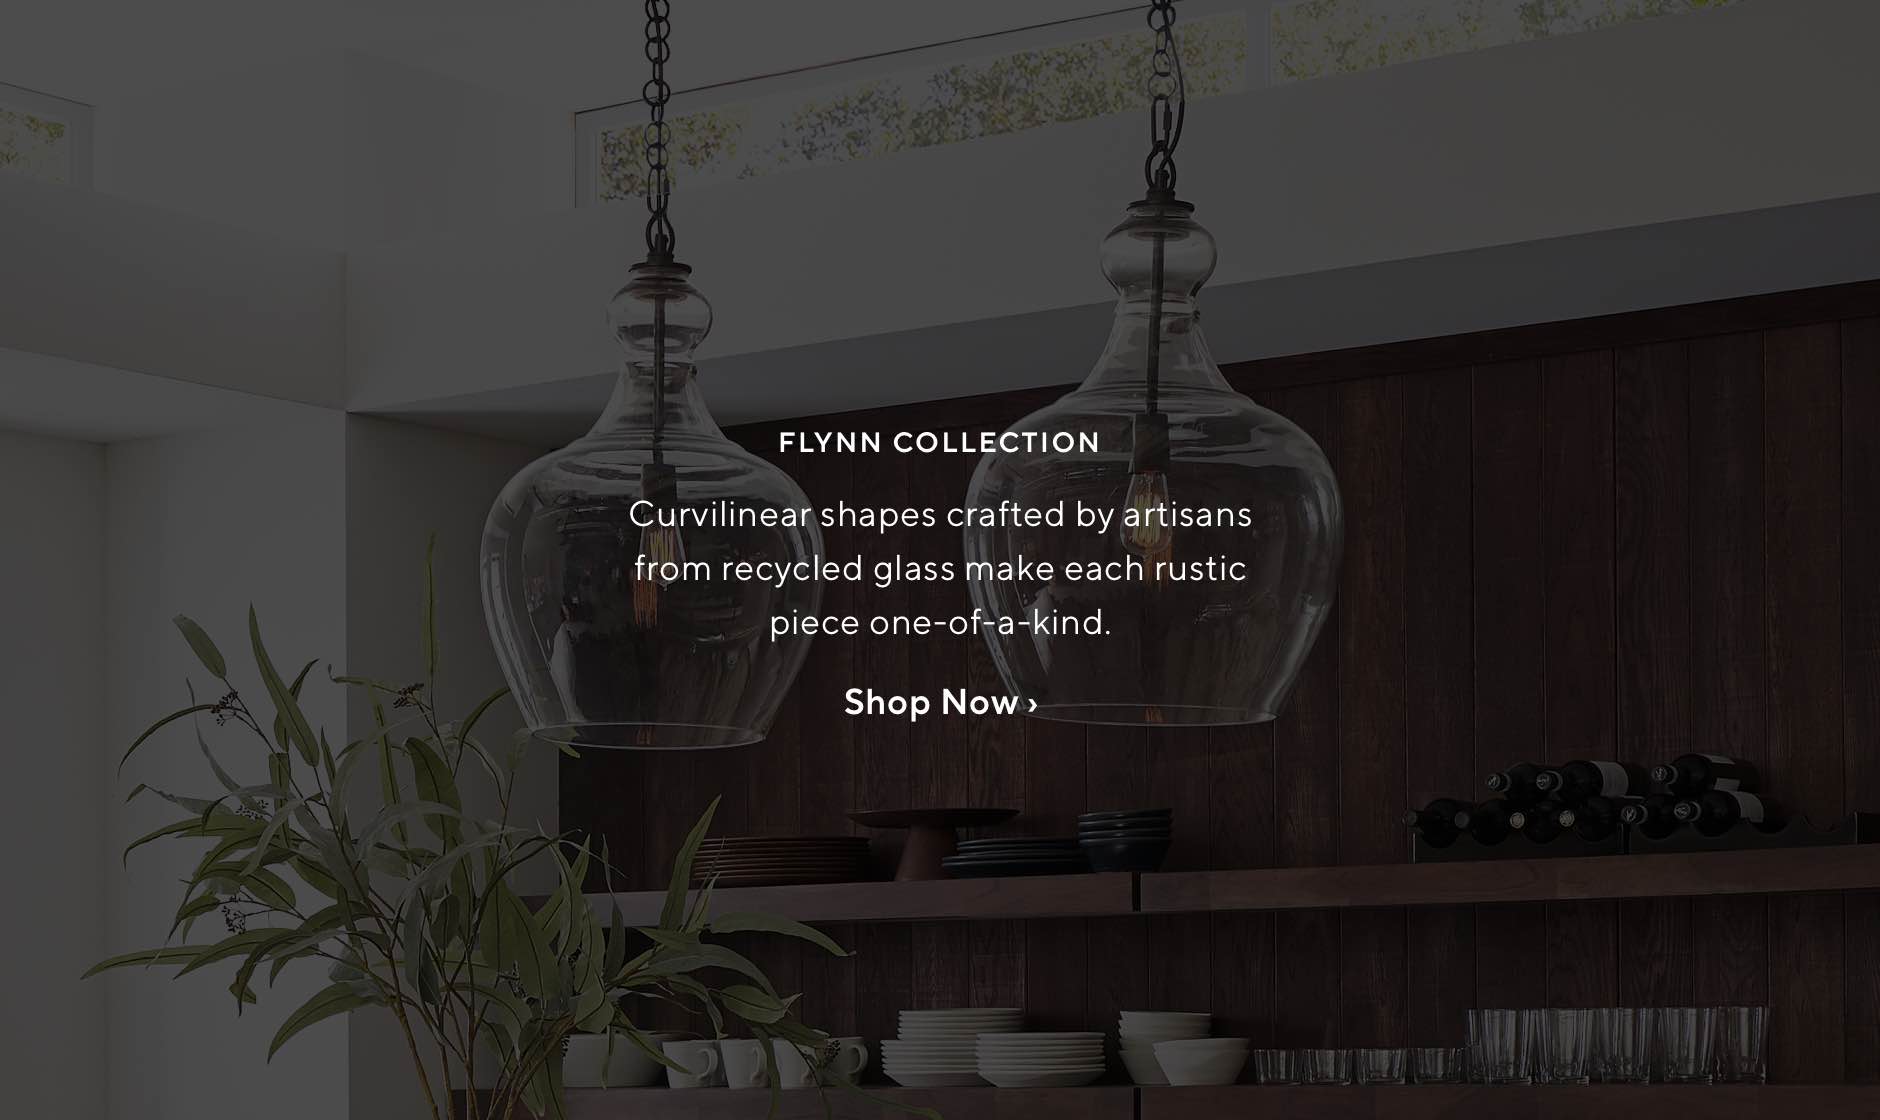 FLYNN COLLECTION